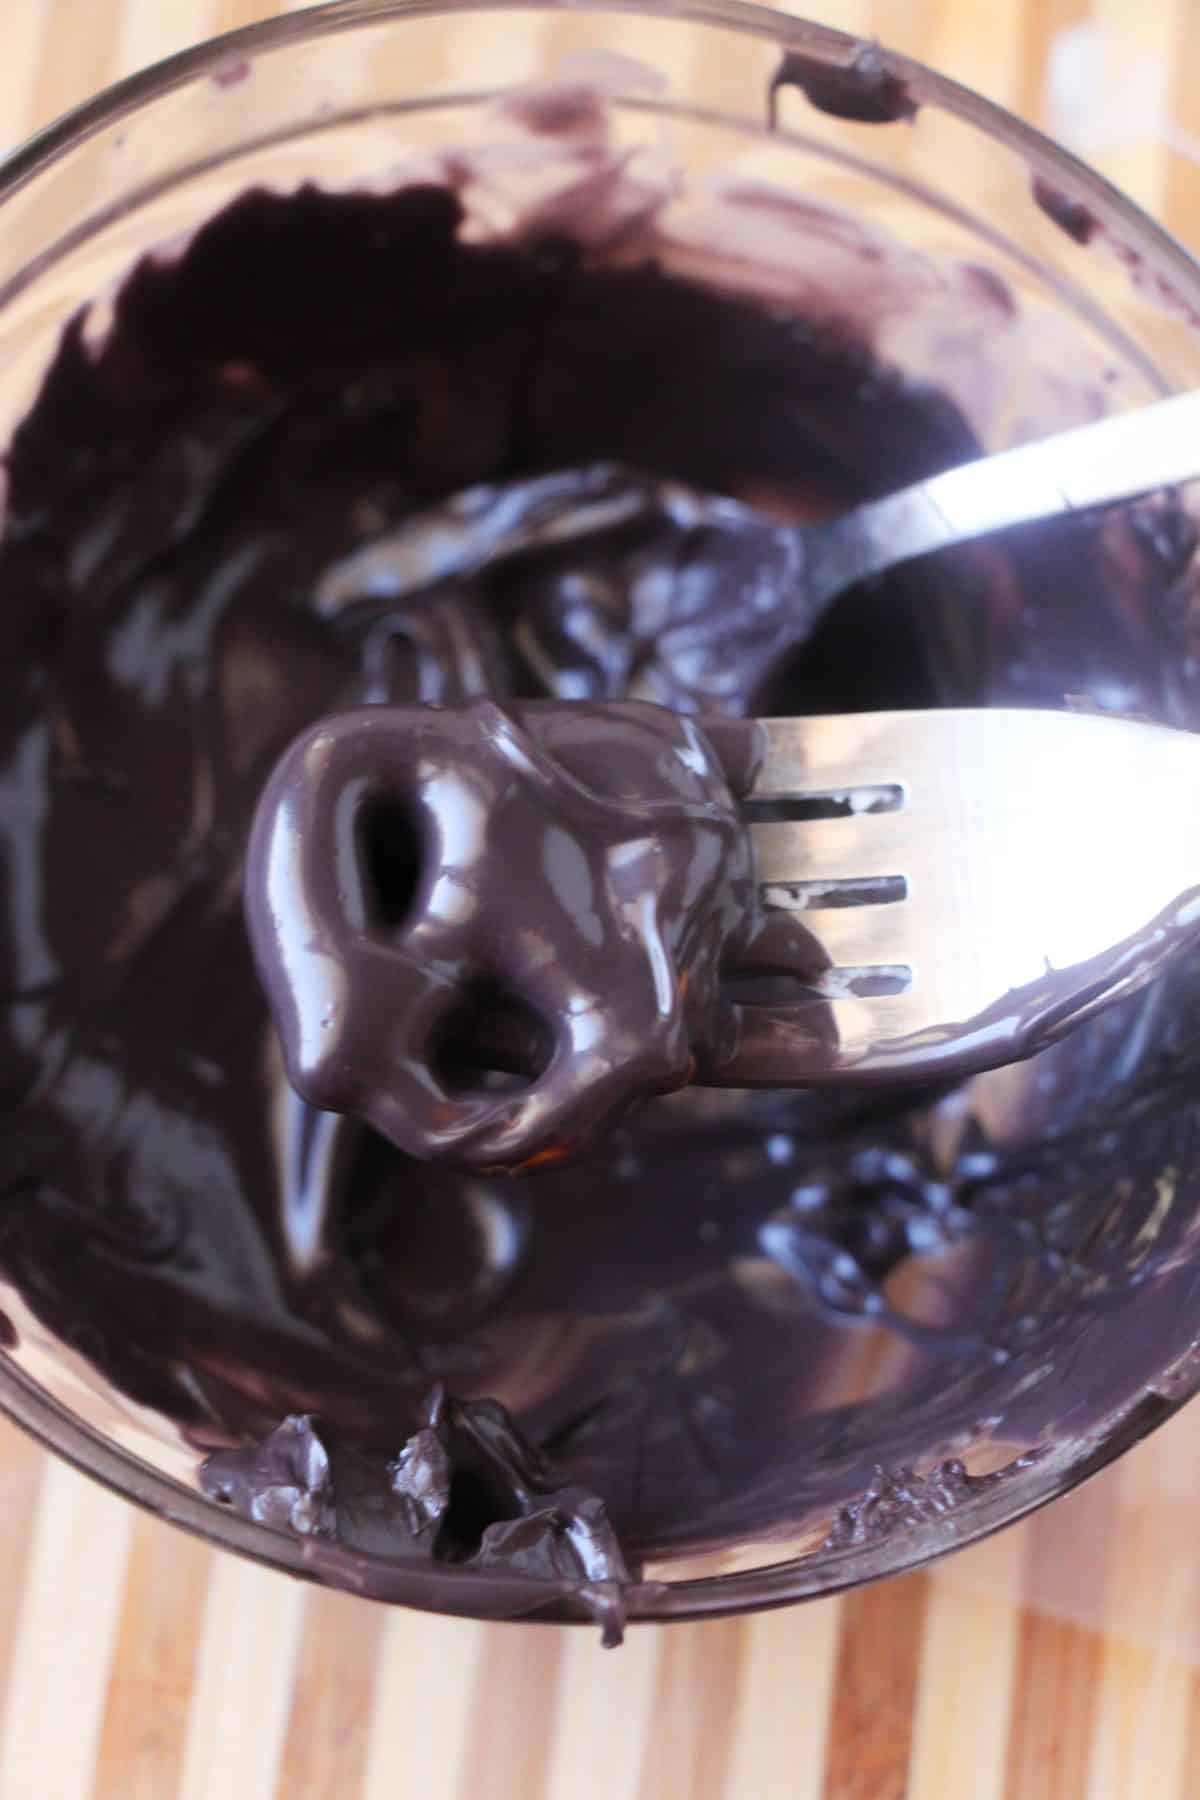 a fork holding a Pretzel coated with melted black candy above the rest of the melted candy in a glass bowl